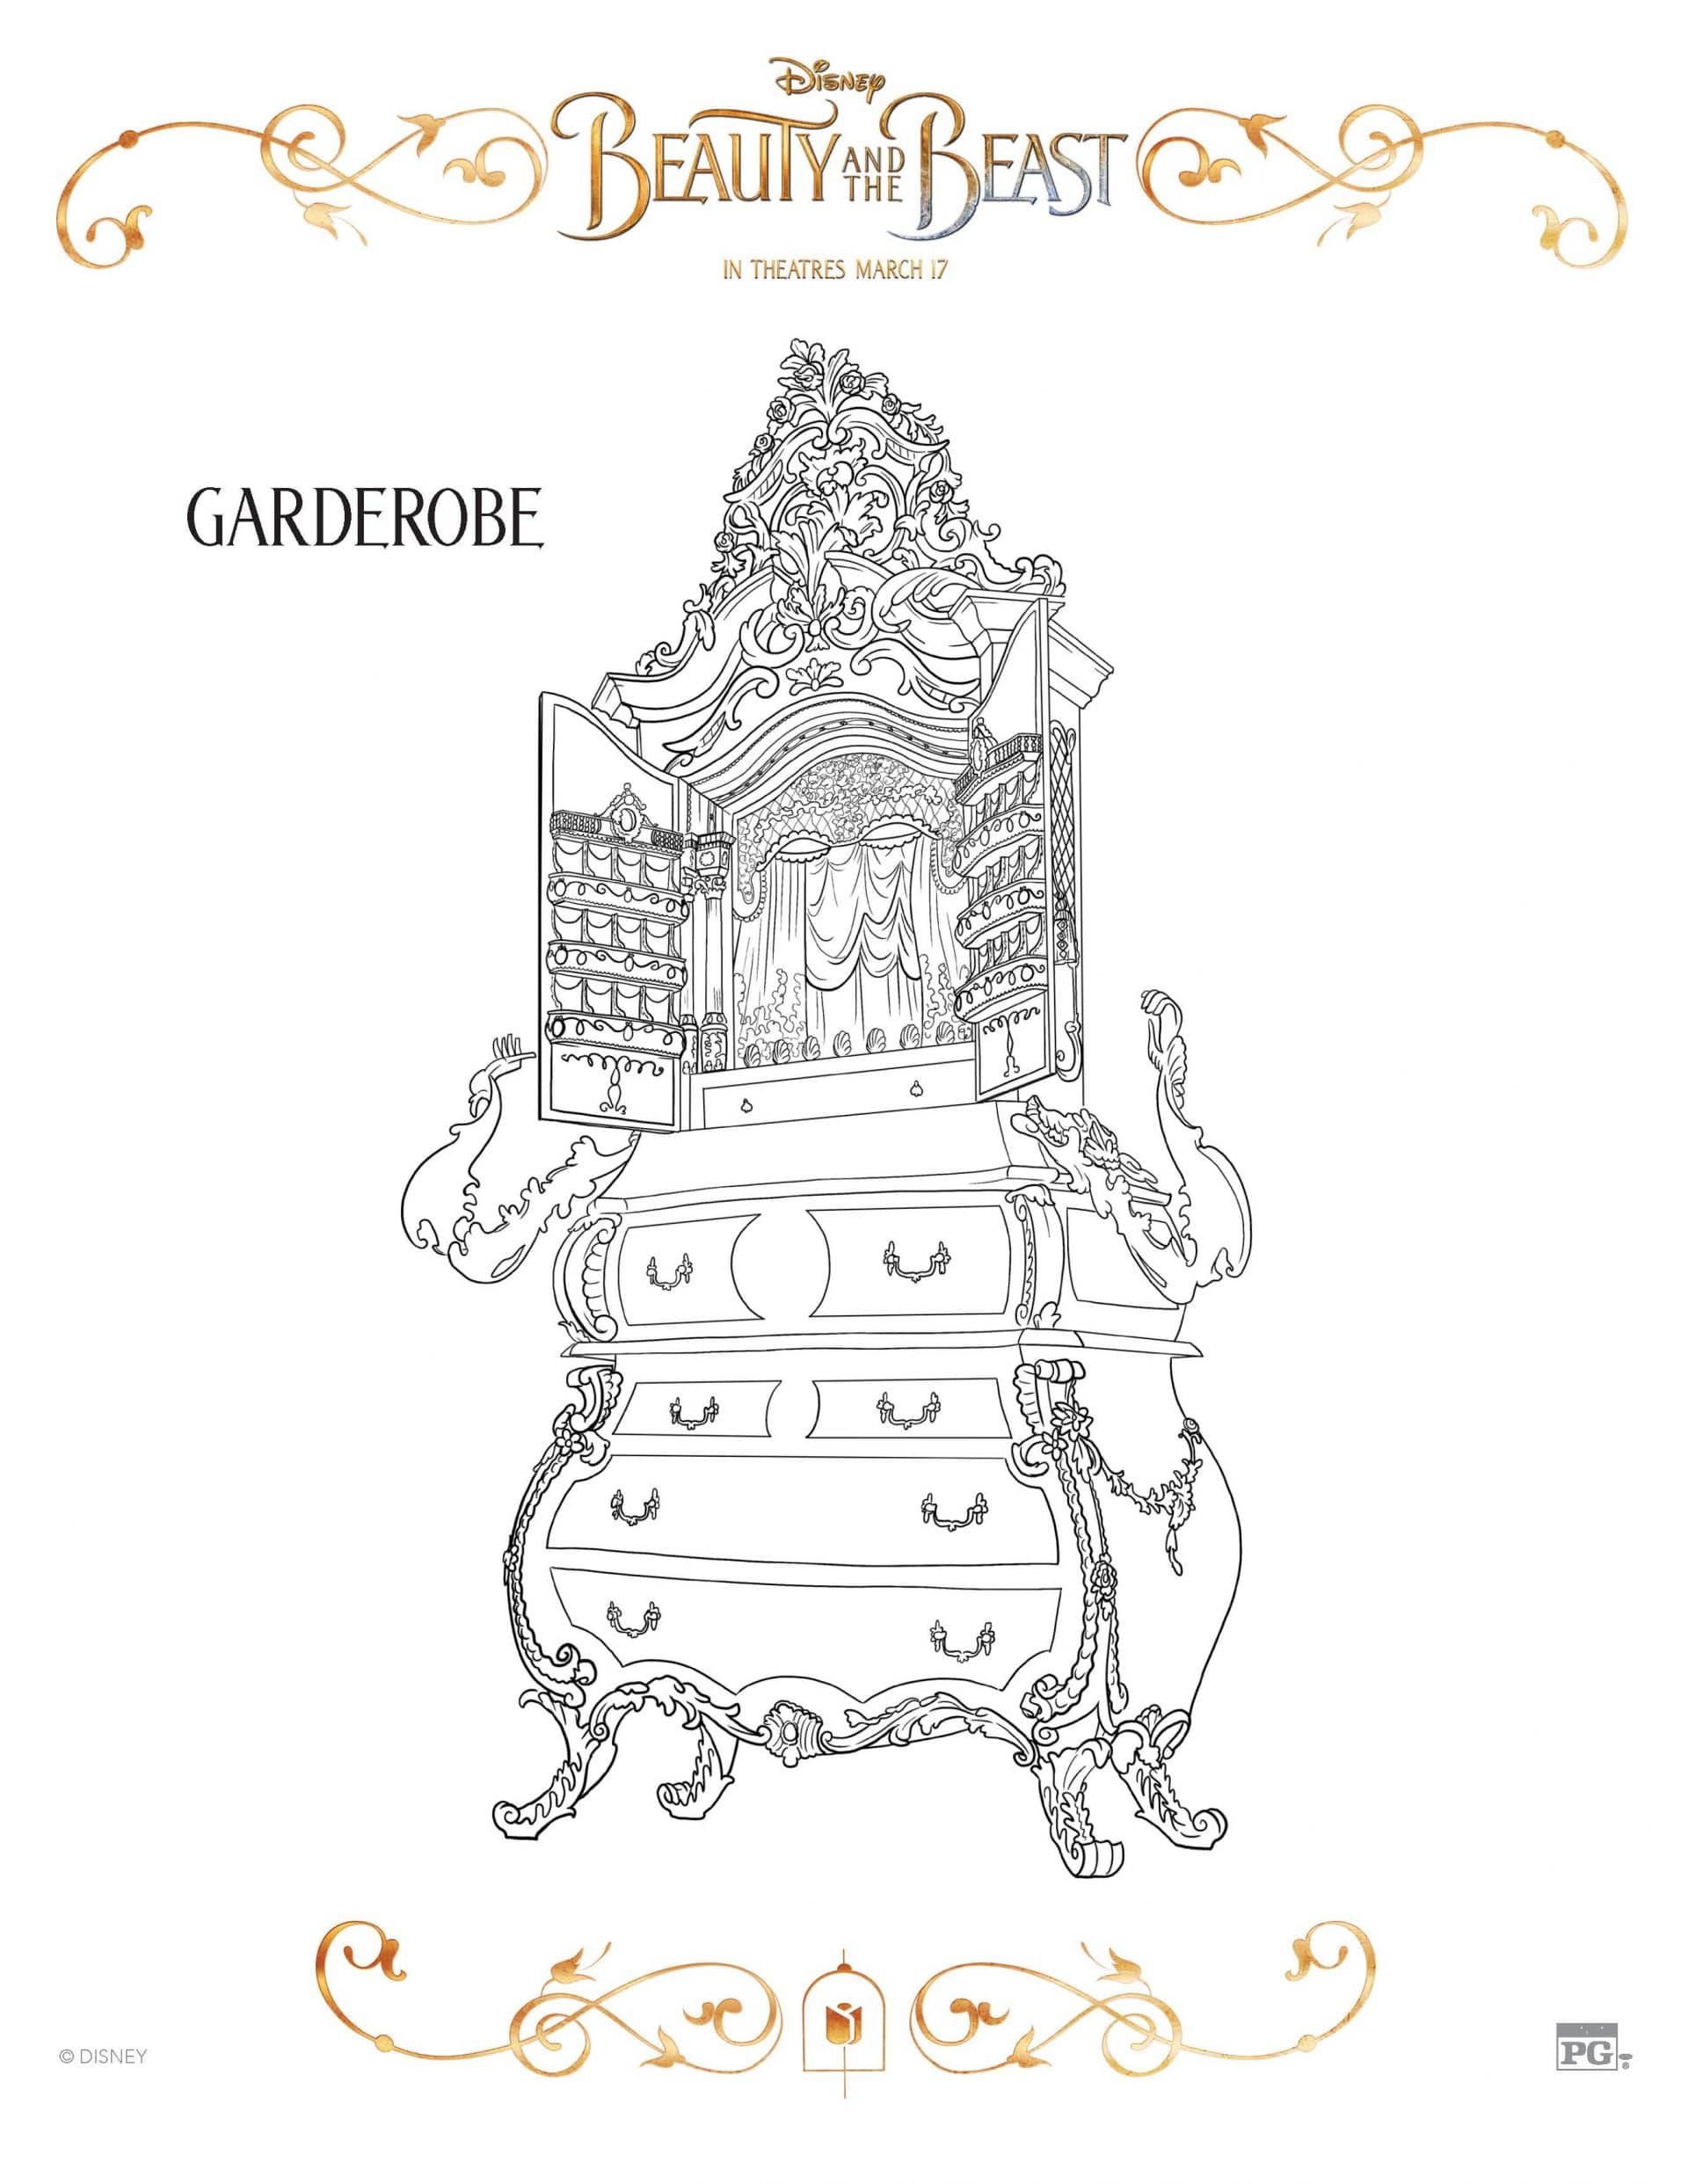 Beauty And The Beast Garderobe Coloring Page